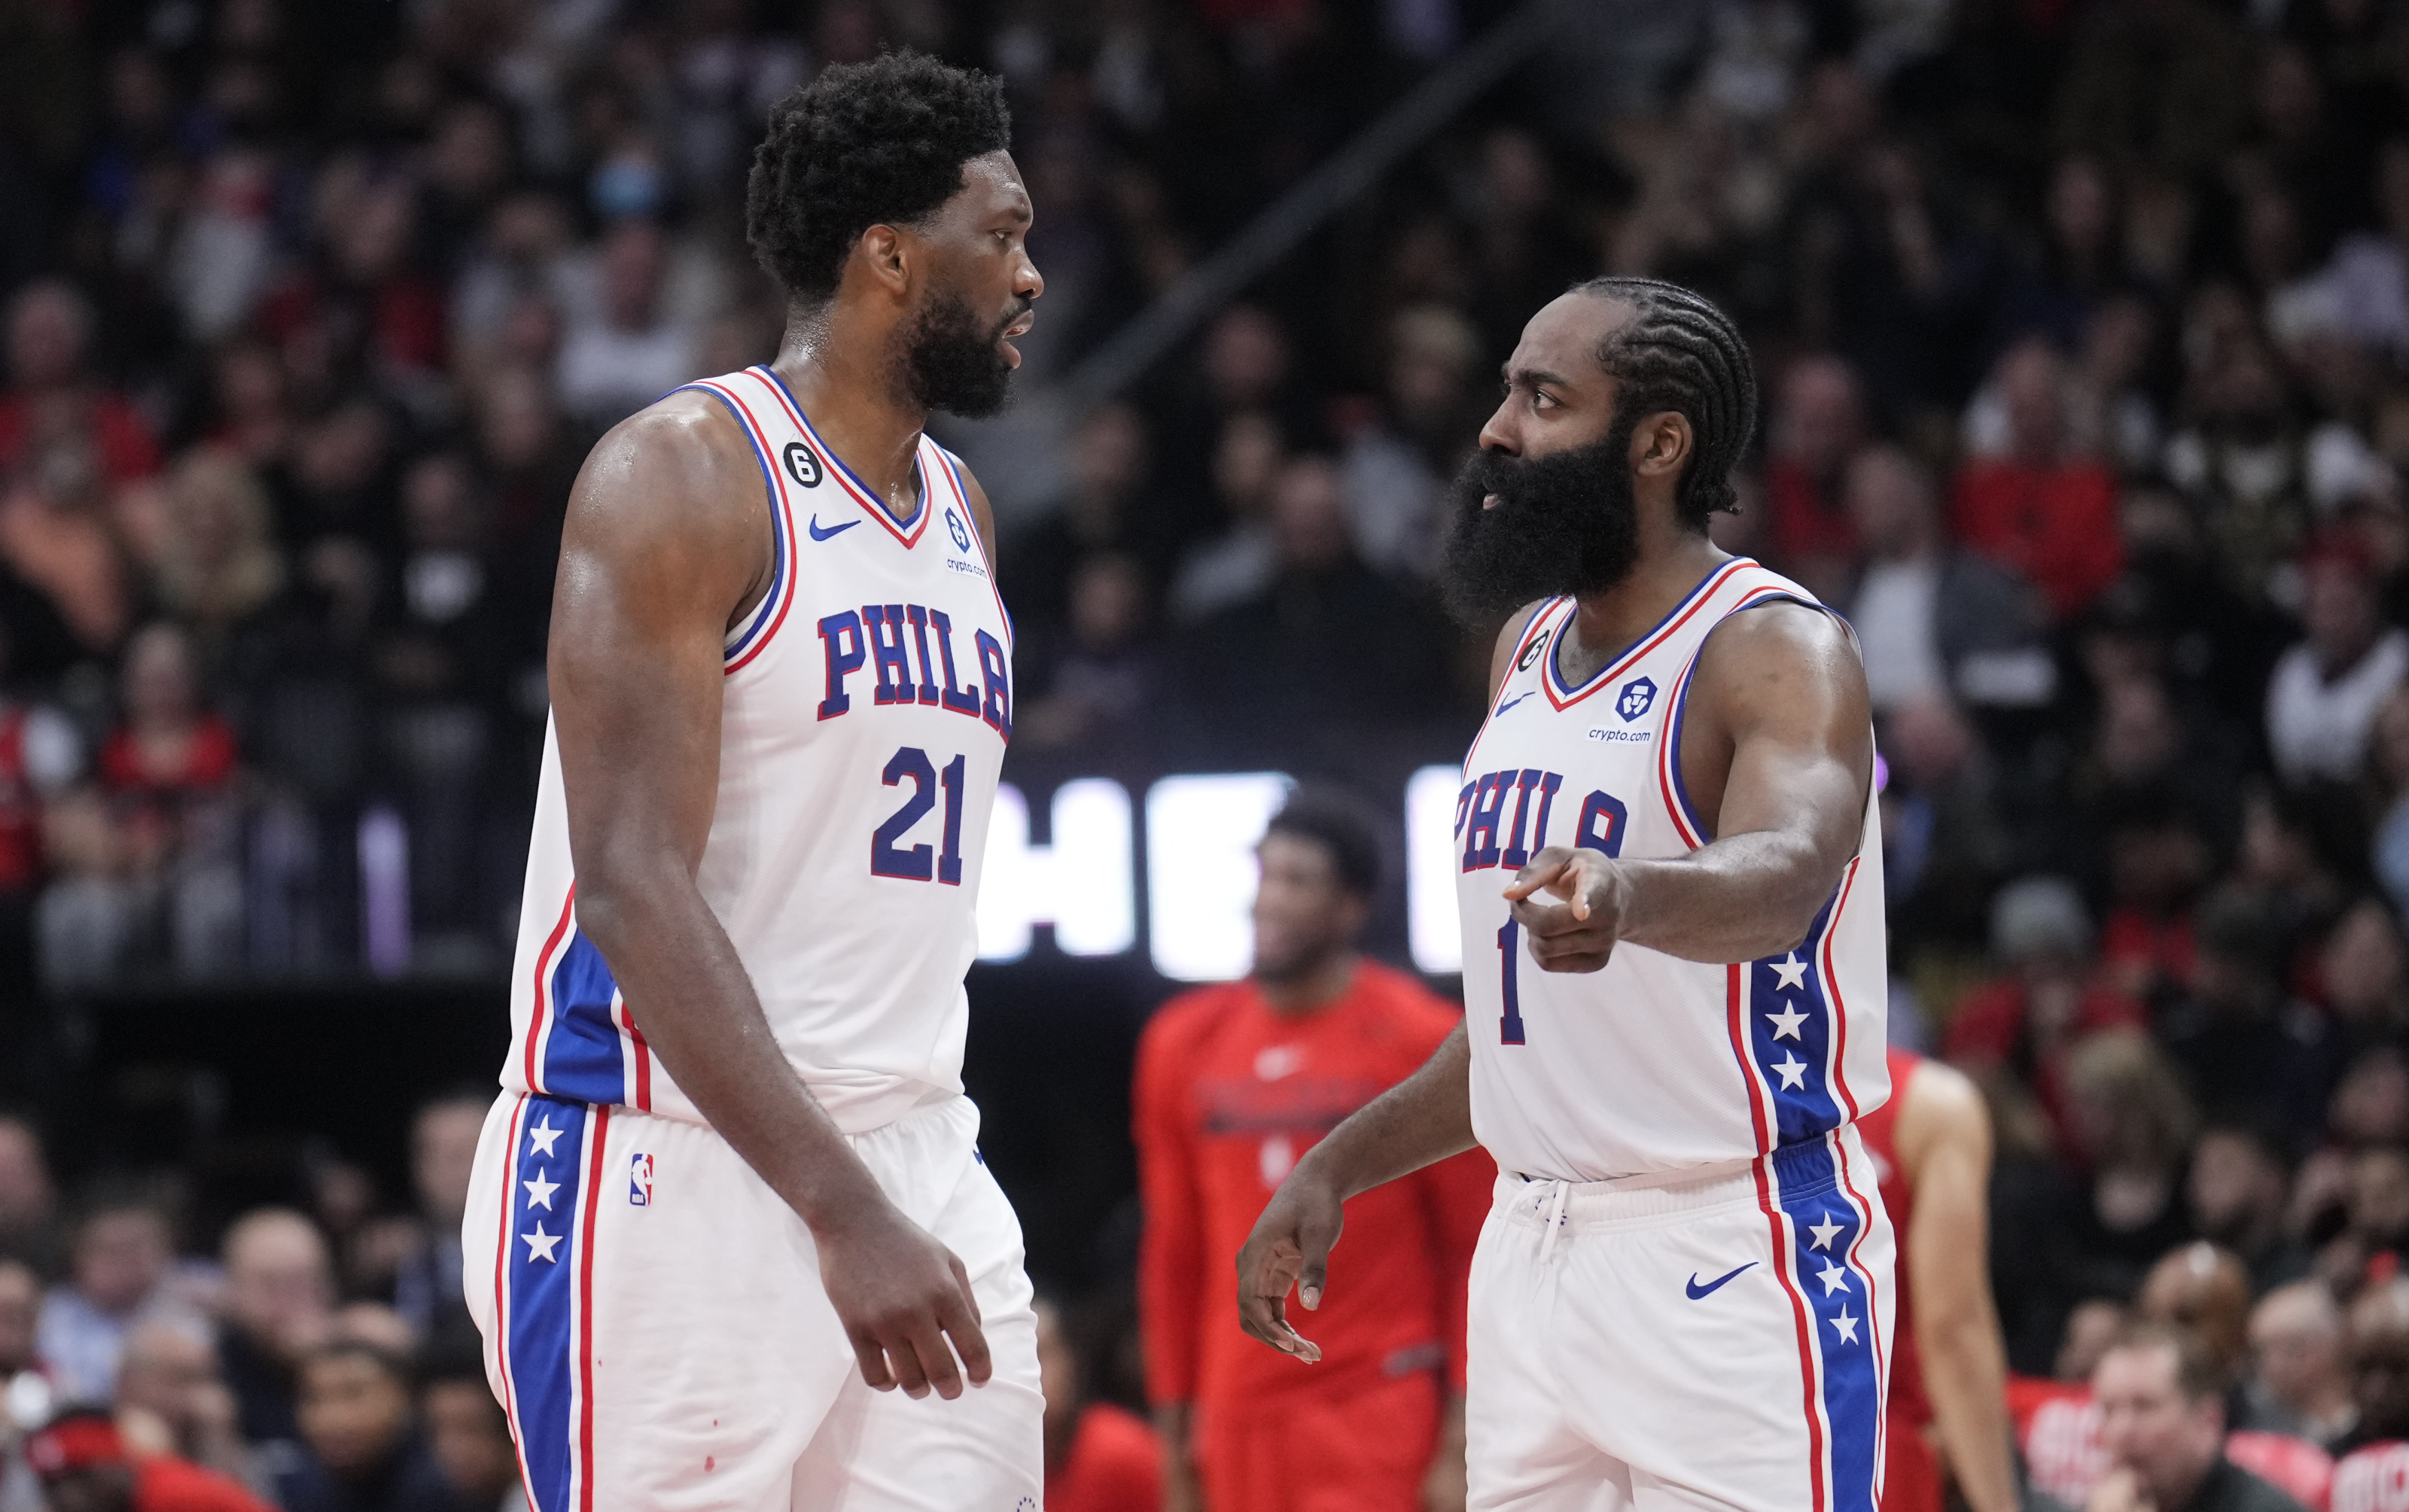 Sixers: Whose team is this, James Harden or Joel Embiid?